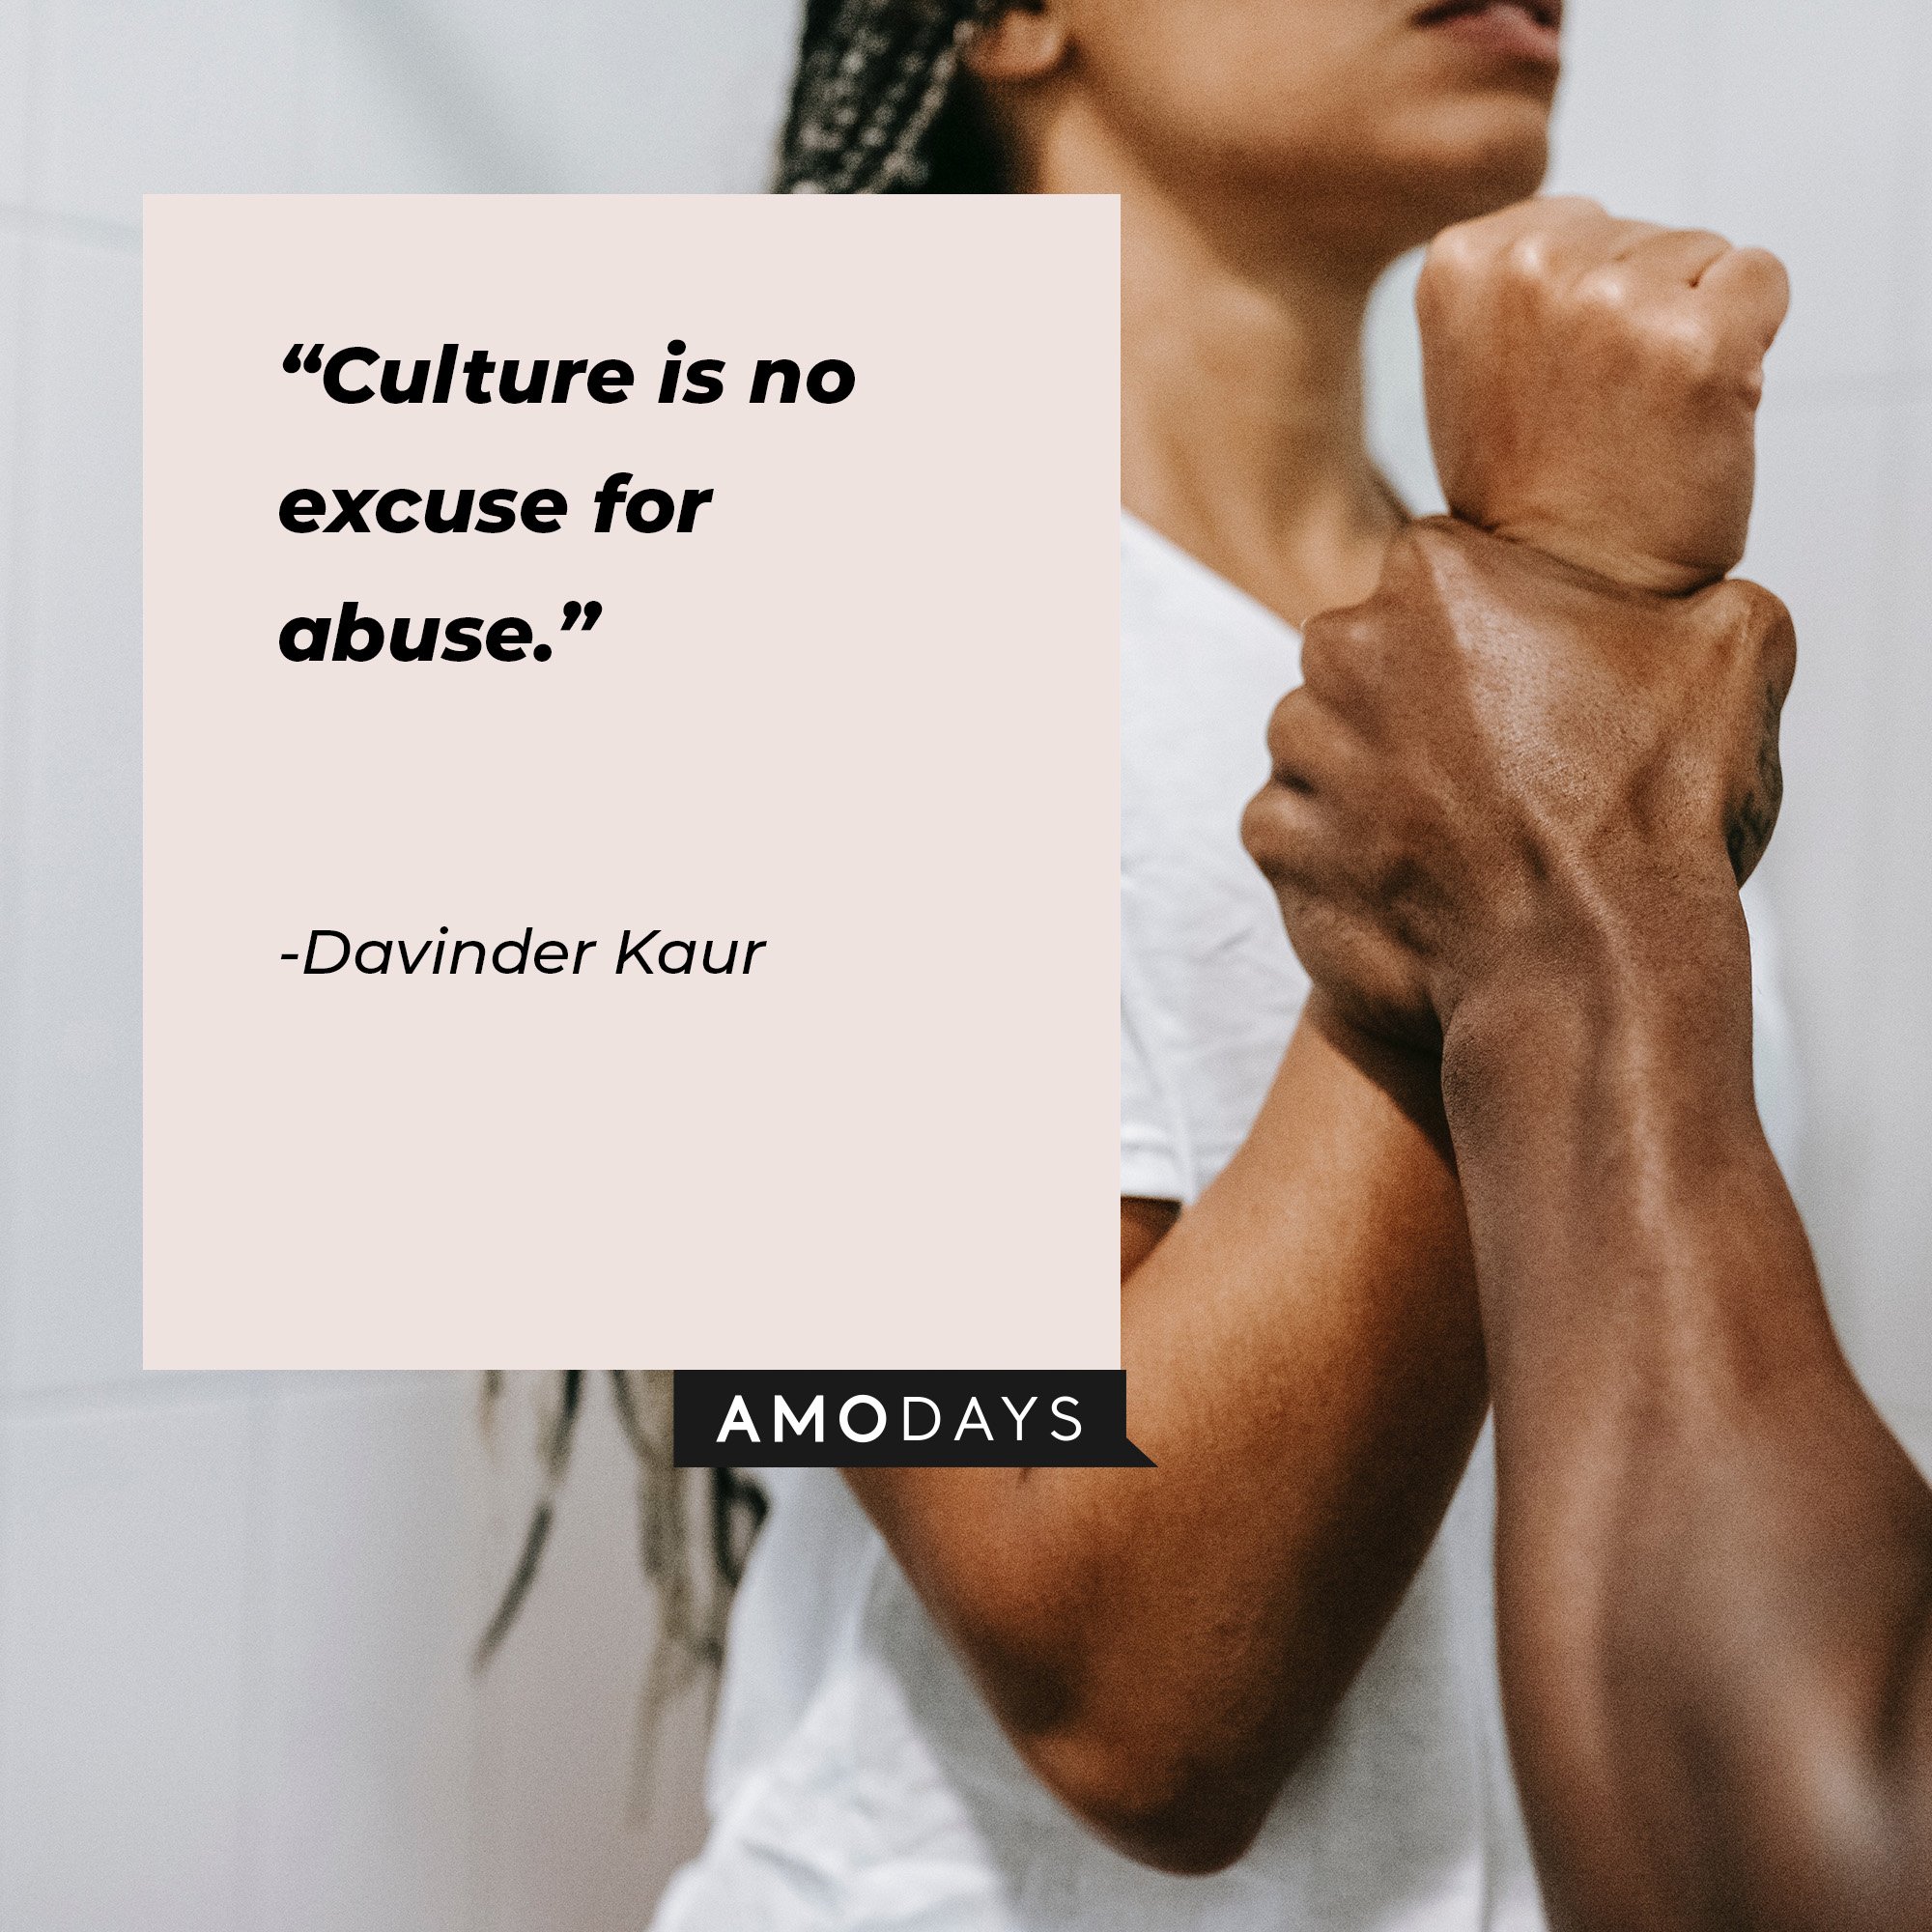 Davinder Kaur’s quote:“Culture is no excuse for abuse.” | Image: Amodays